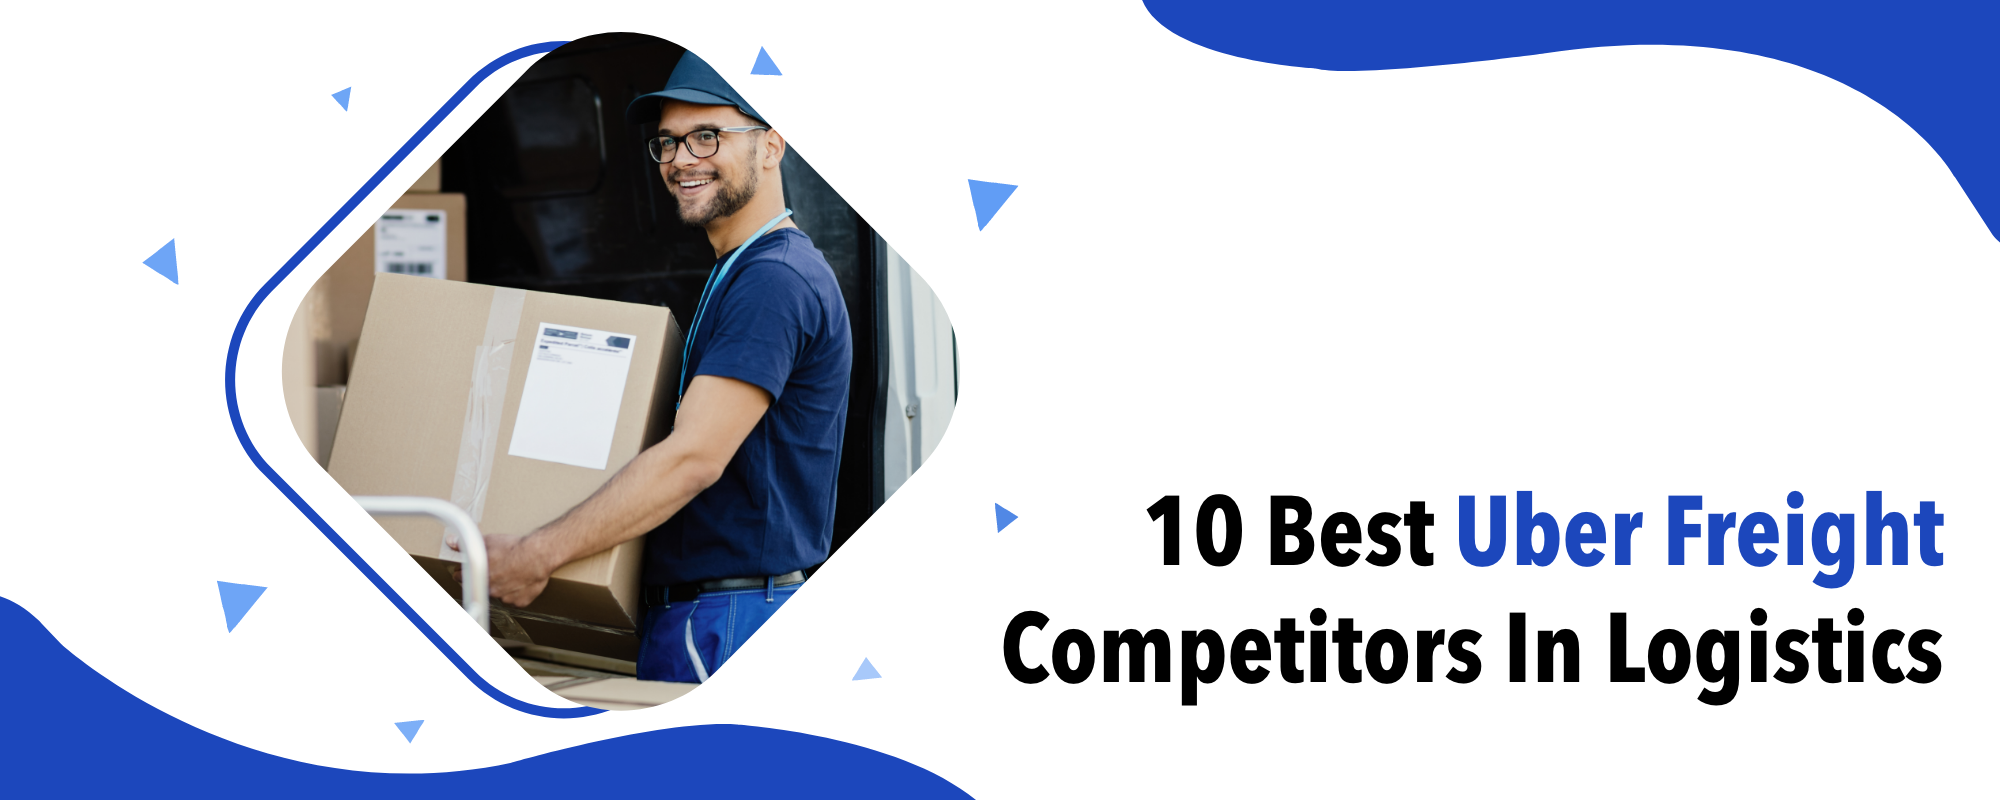 10 Best Uber Freight Competitors In Logistics